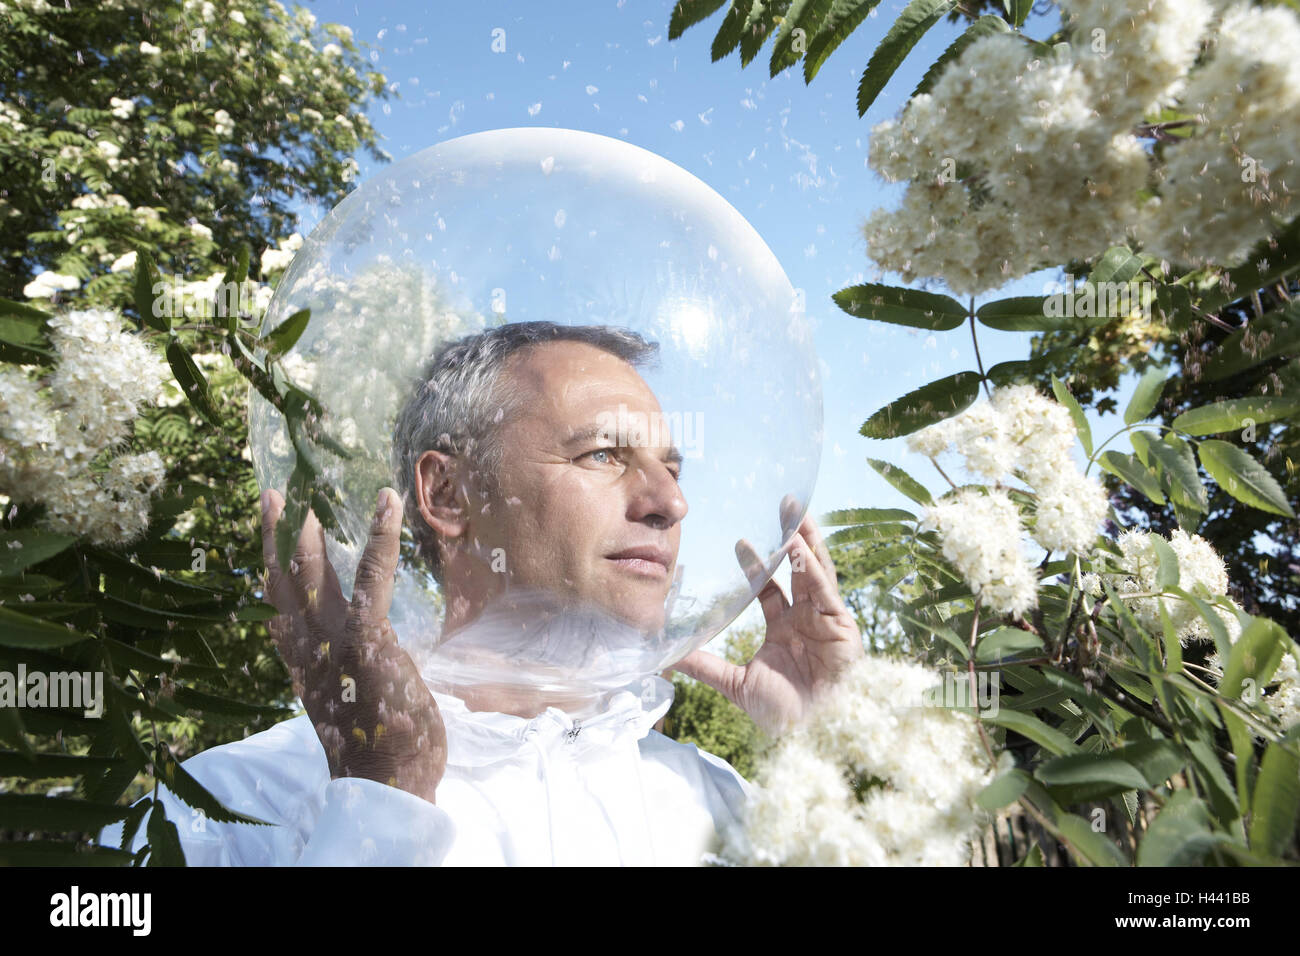 Garden, shrub, blossoms, man, head, glass ball, gesture, icon, allergy, protection, isolation, model released, people, defence, conception, shrubs, blossom, protect disease, allergically, reaction, measure, counterweir, security, avoidance, allergens, pollings, flower pollings, polling allergy, hay fever, hypersensibility, sensibility, resistant, insensitively, covers, finished, refuse, isolate, immune, immunity, sensitively, insensitively, sensibility, insensitiveness, self protection, prevention, transparency, outside, Stock Photo